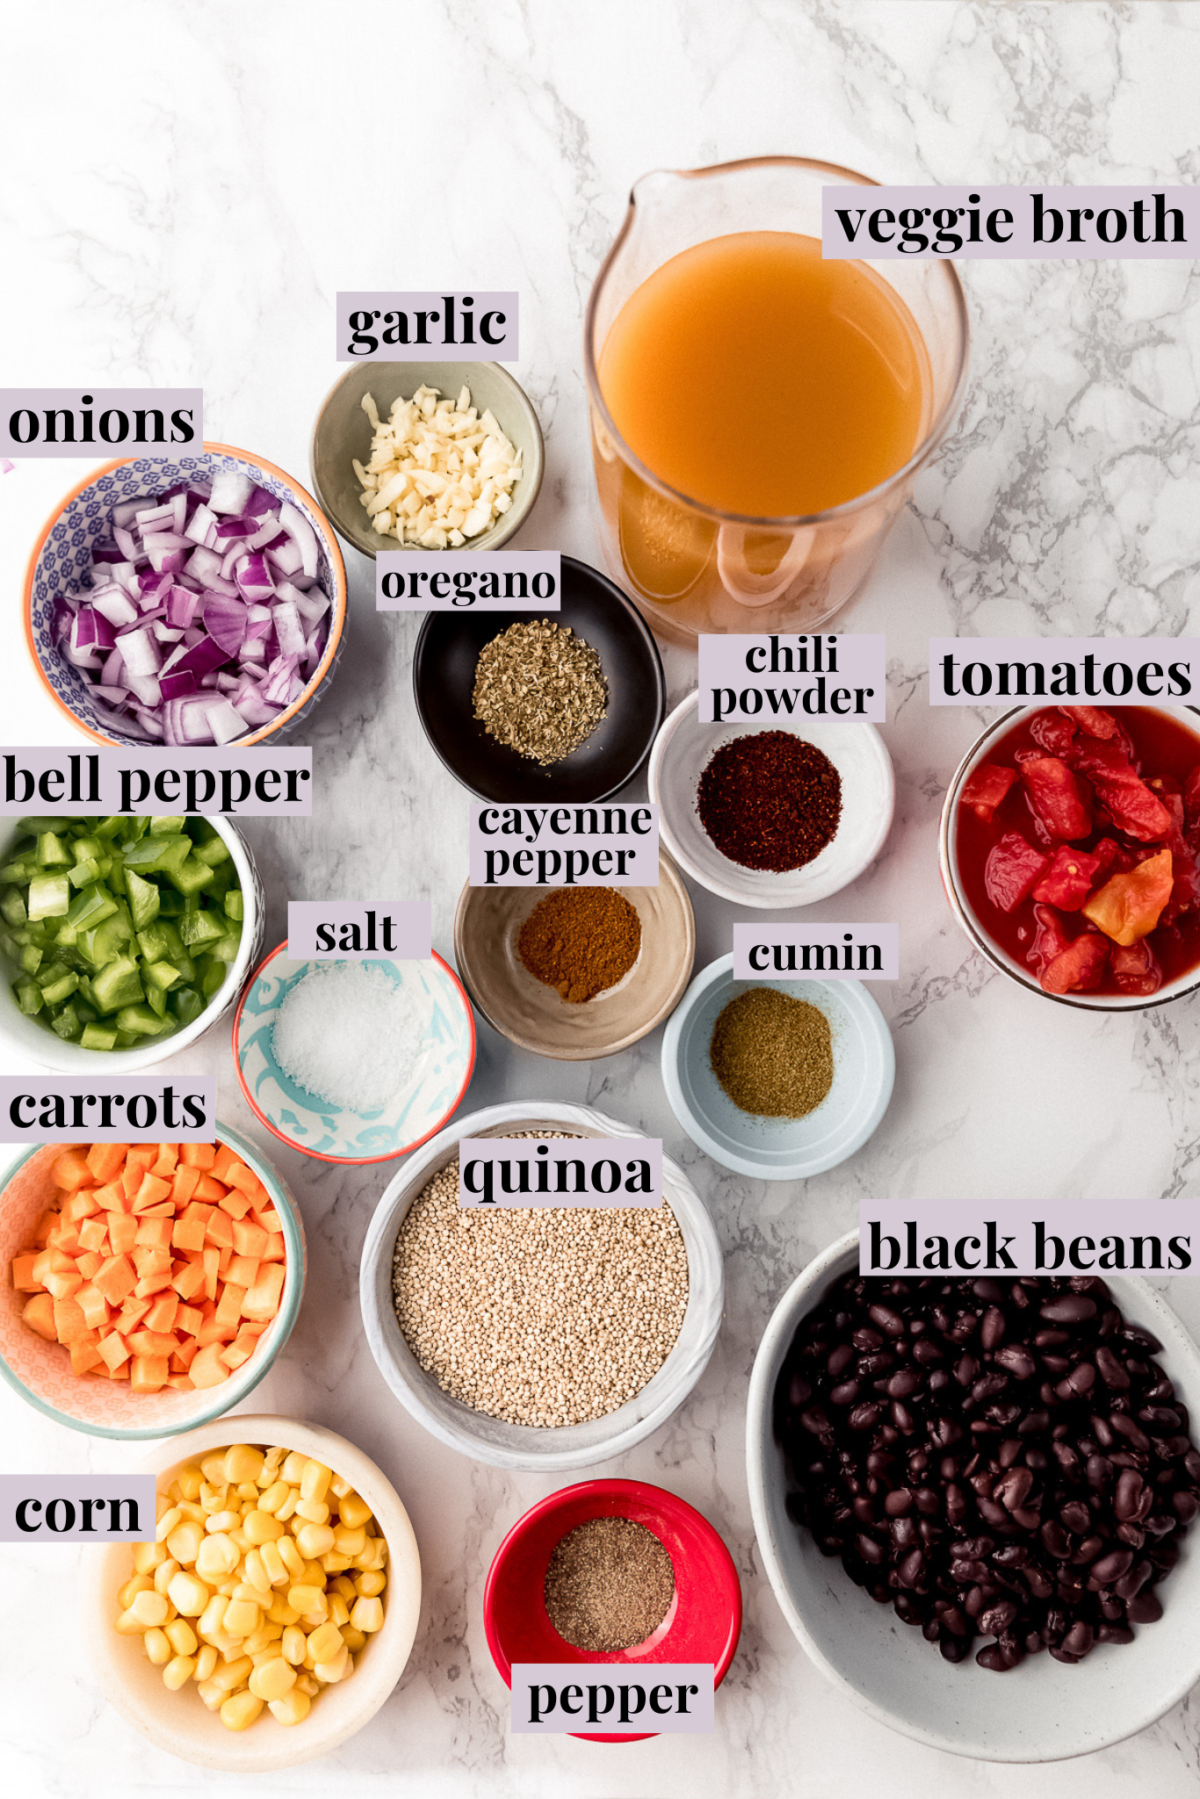 Overhead view of the ingredients for vegan chili, in bowls, labeled: veggie broth, garlic, onions, bell pepper, salt, tomatoes, chili powder, cayenne pepper, oregano, cumin, carrots, quinoa, corn, pepper, black beans